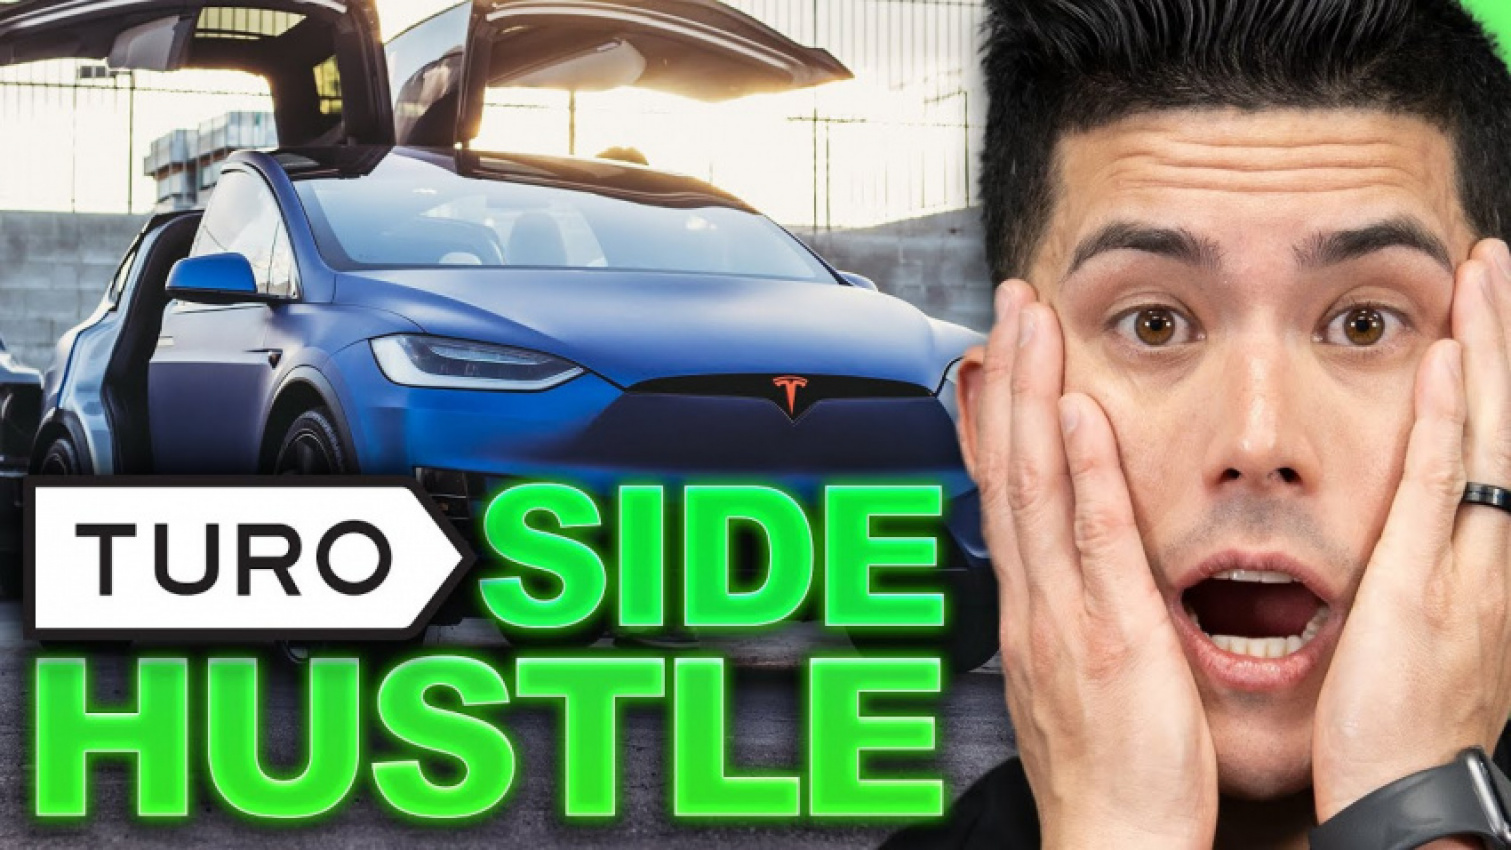 autos, cars, tesla, amazon, andrei jikh, bigger pockets, car rental business, cash flow, entrepreneur, exotic cars, financial freedom, future flipper, graham stephan, grant cardone, house flipper, house flipping, how to buy a supercar, how to drive an exotic car for free, how to make money, max maxwell, meet kevin, online business, passive income, real estate, real estate investing, real estate investor, rental properties, ryan pineda, supercar, tesla model x, thestradman, turo, turo app, turo car rental, amazon, how much i made renting my tesla model x on turo